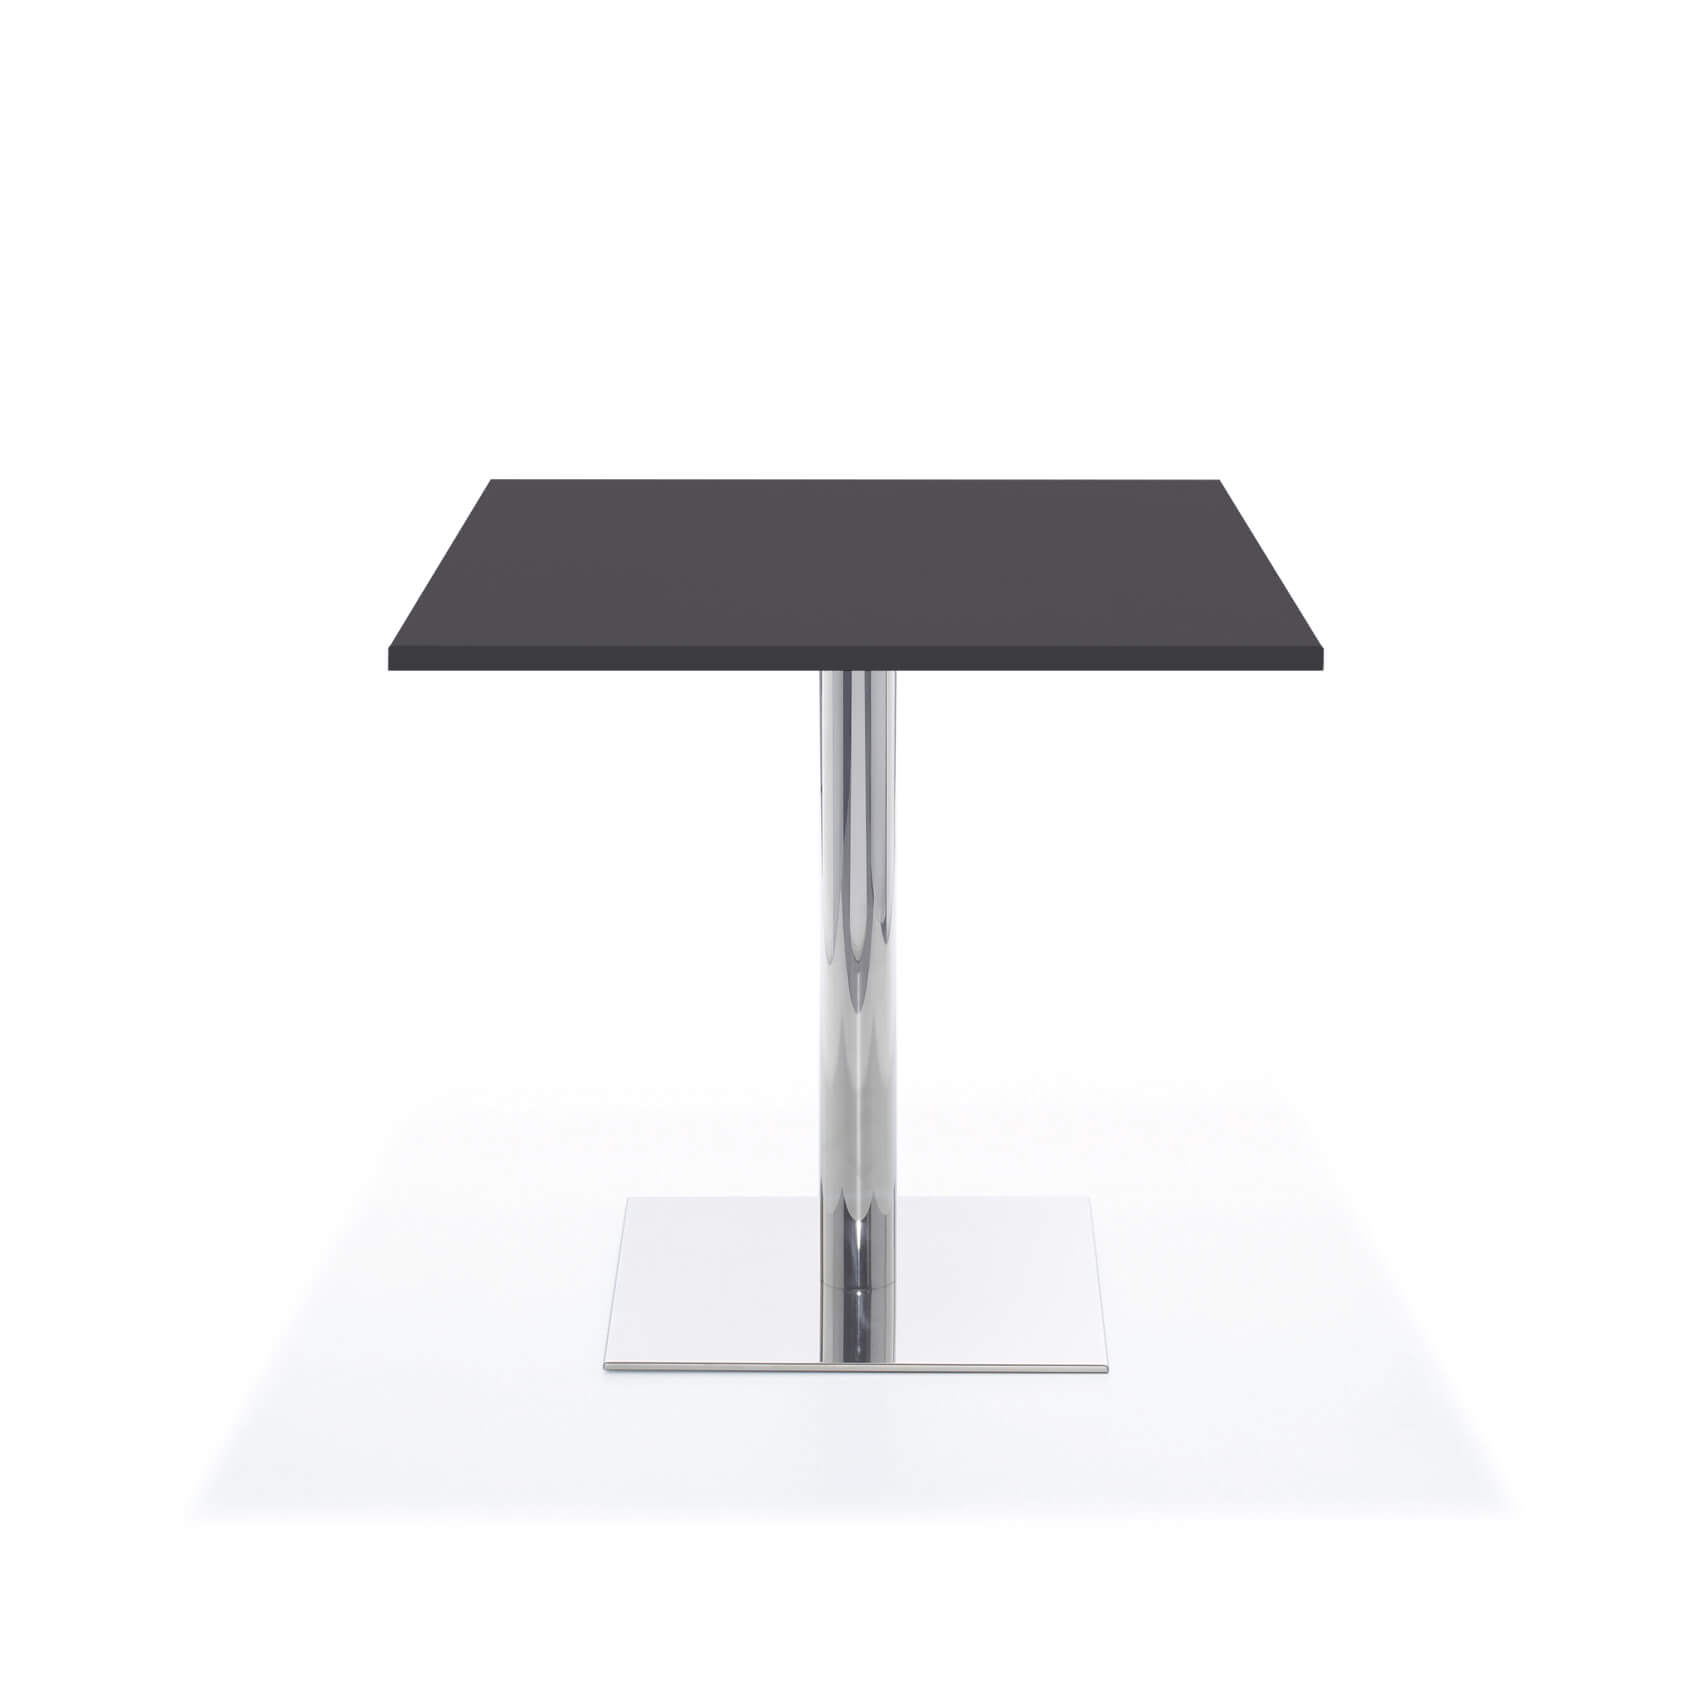 Paolo seating table KS 70 x 70